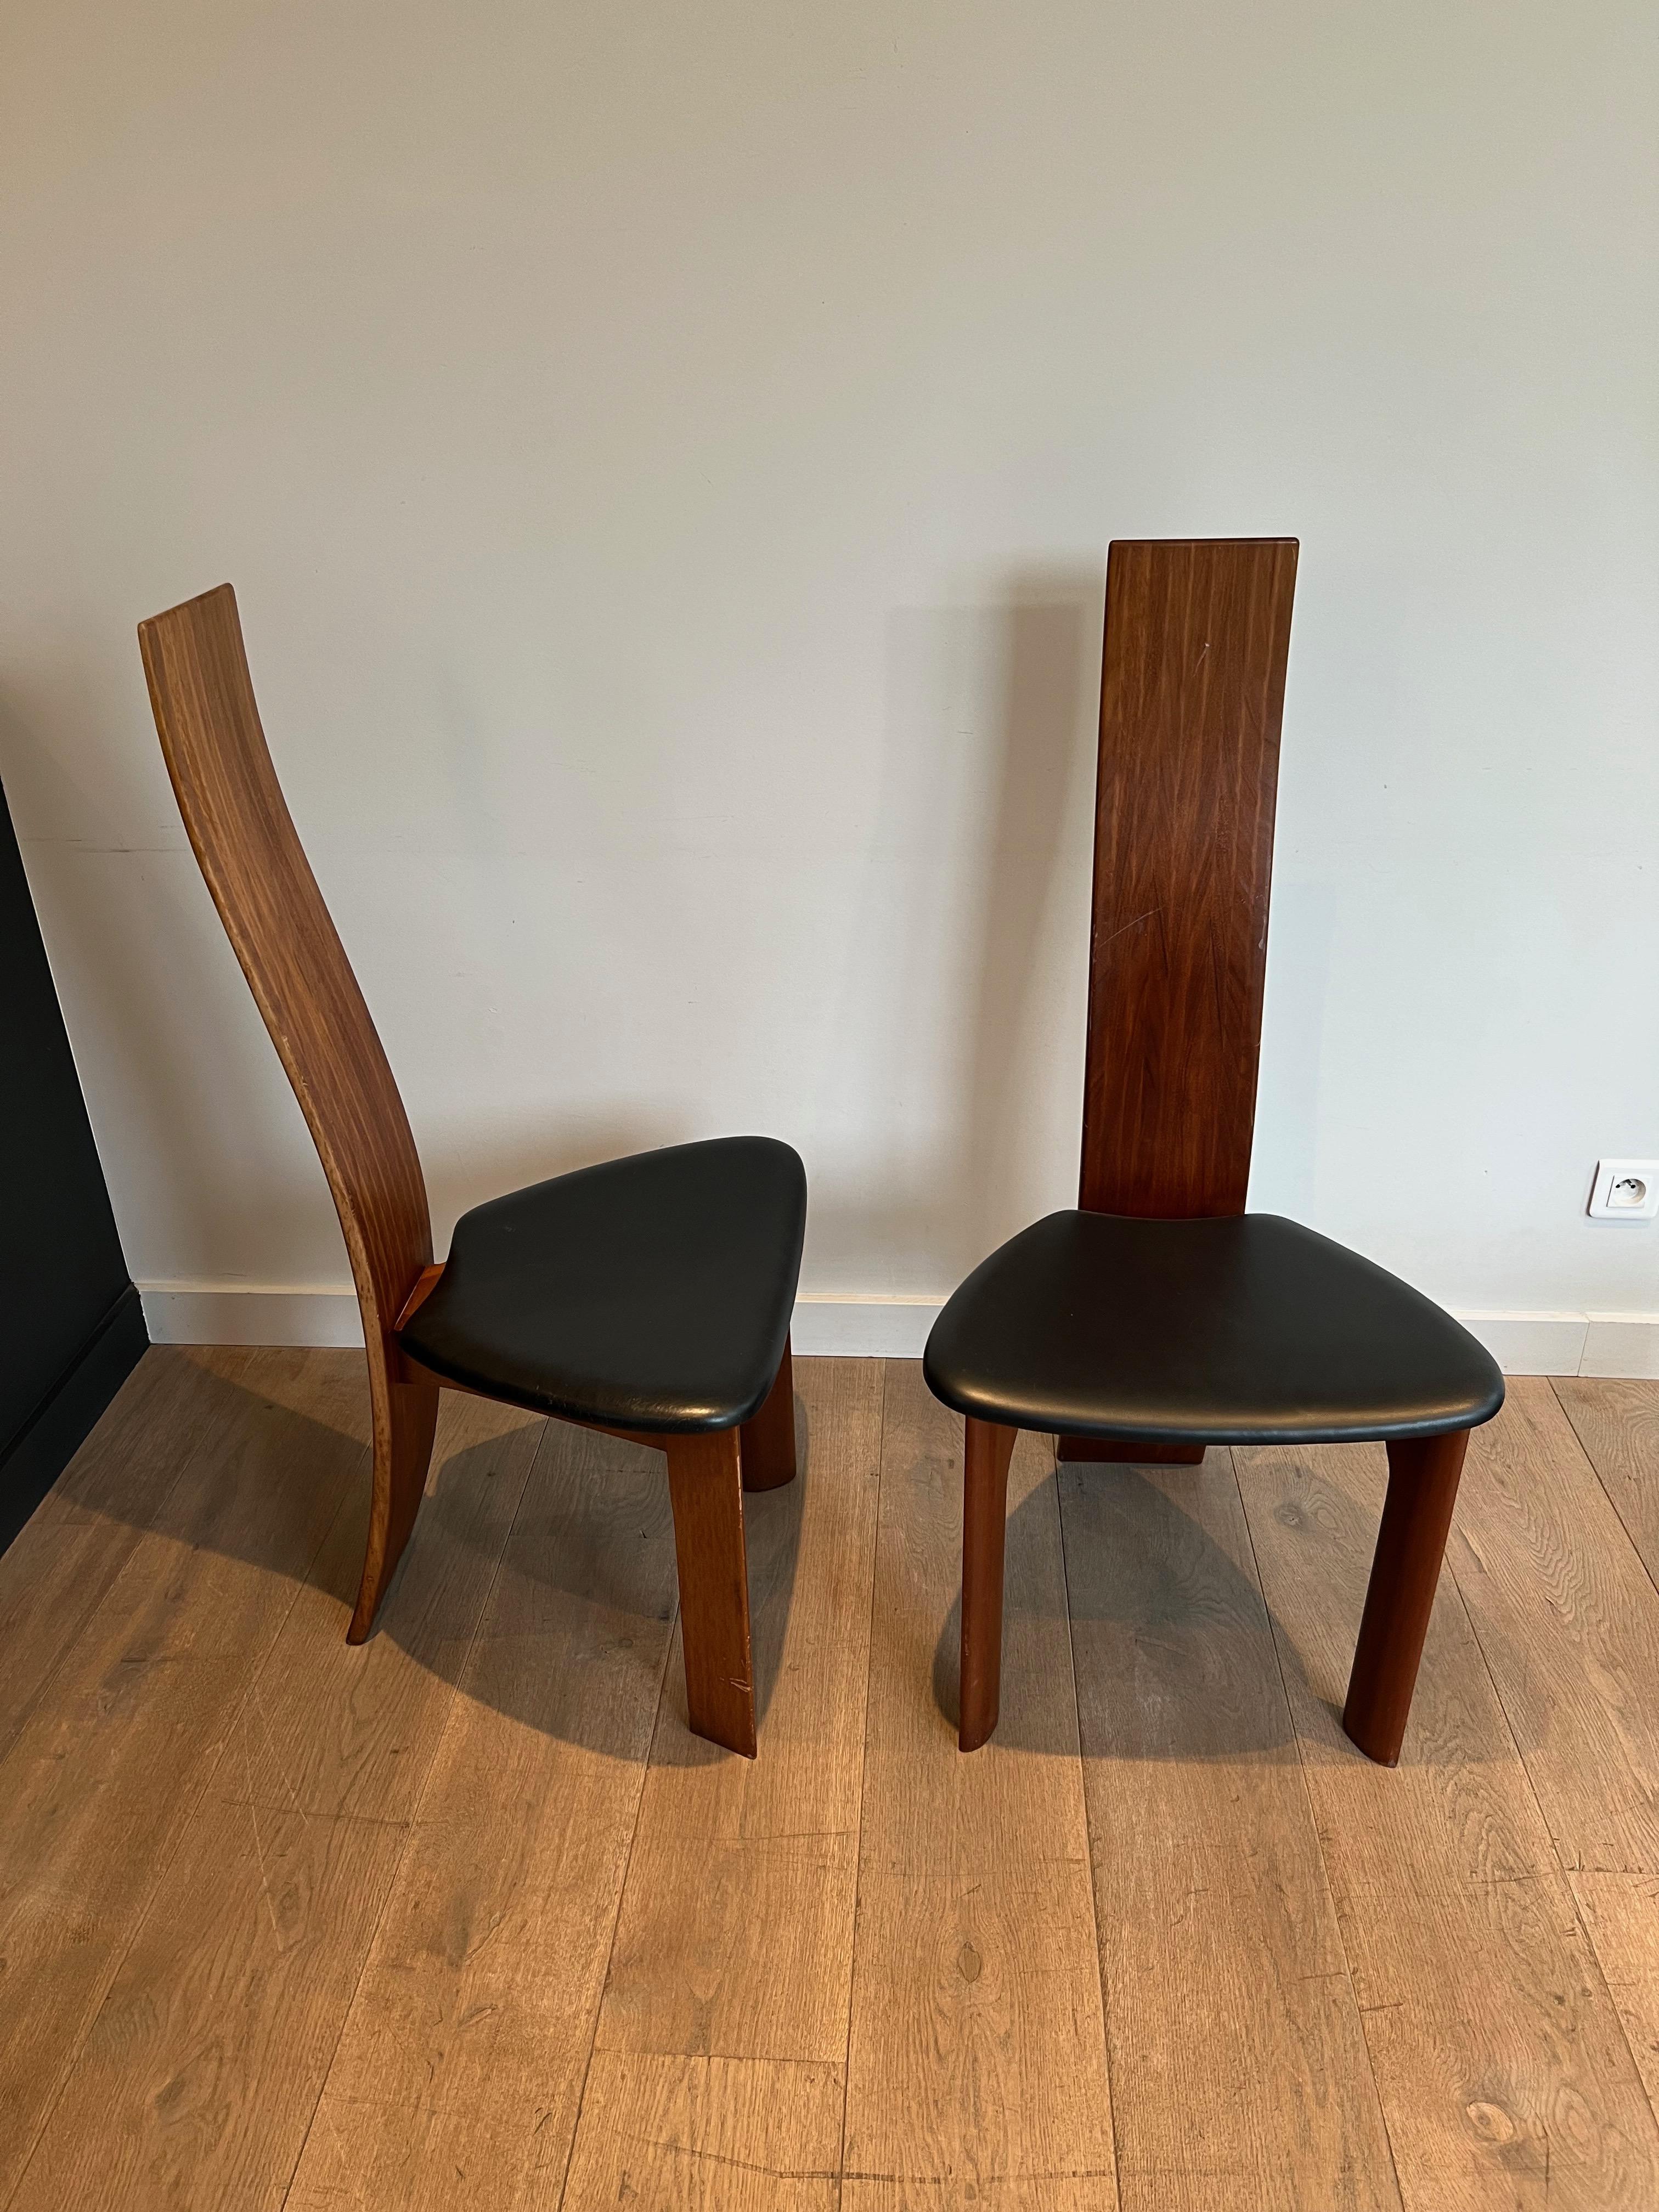 Pair of Exotic Wood and Black Leather Chairs, Scandinavian Work. Circa 1970 For Sale 14